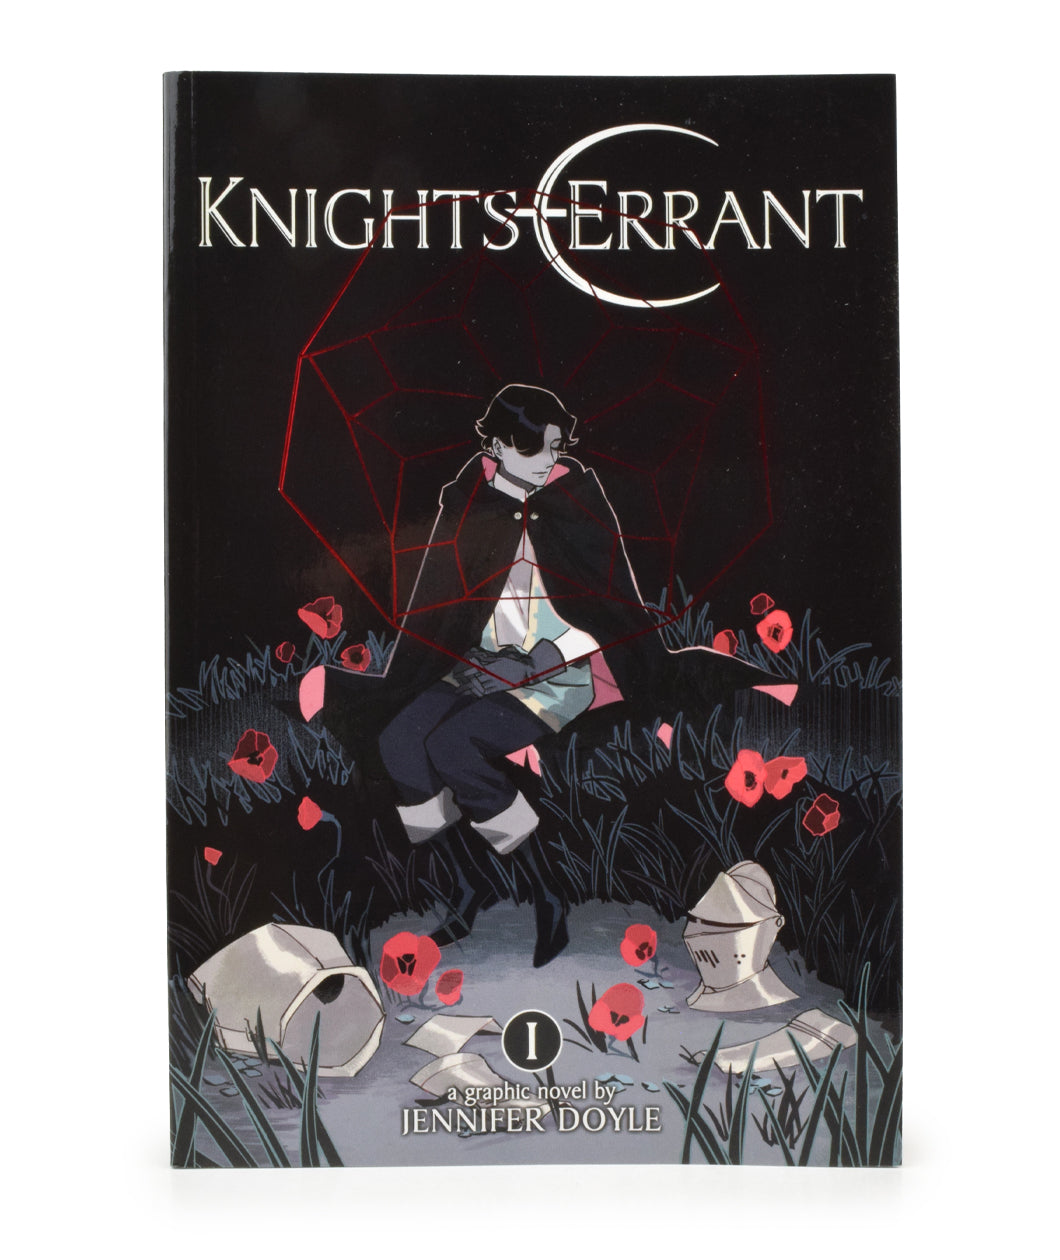 A book cover of a person witting among flowers and fallen armor at night. Above the person it reads "Knight Errant". A graphic novel by Jennifer Doyle. 